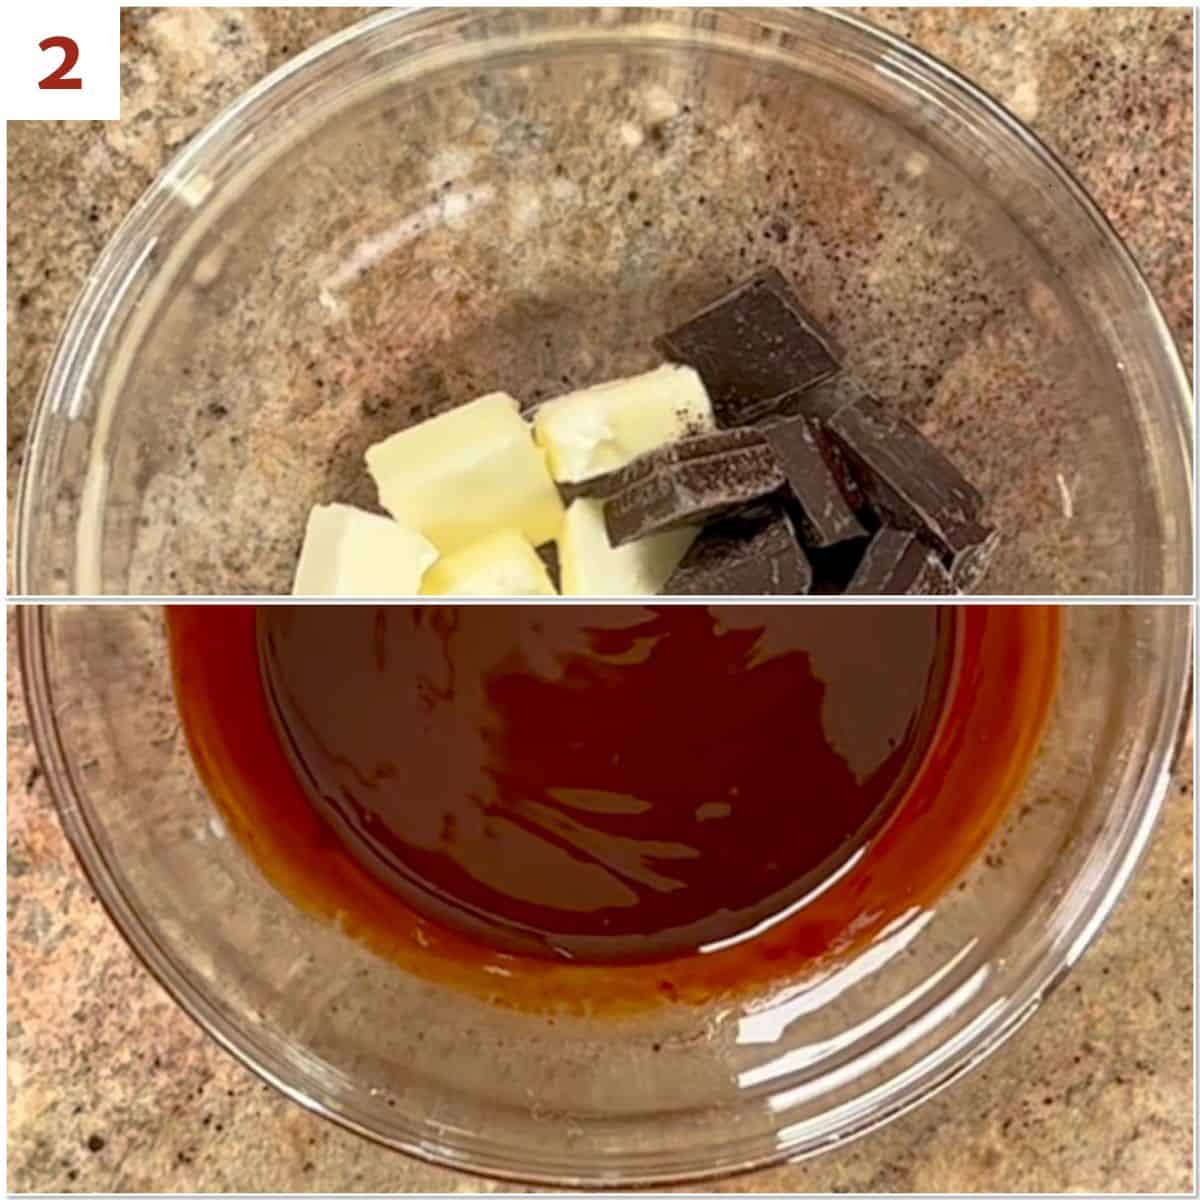 Collage of melting butter and chopped dark chocolate in a glass mixing bowl from overhead.